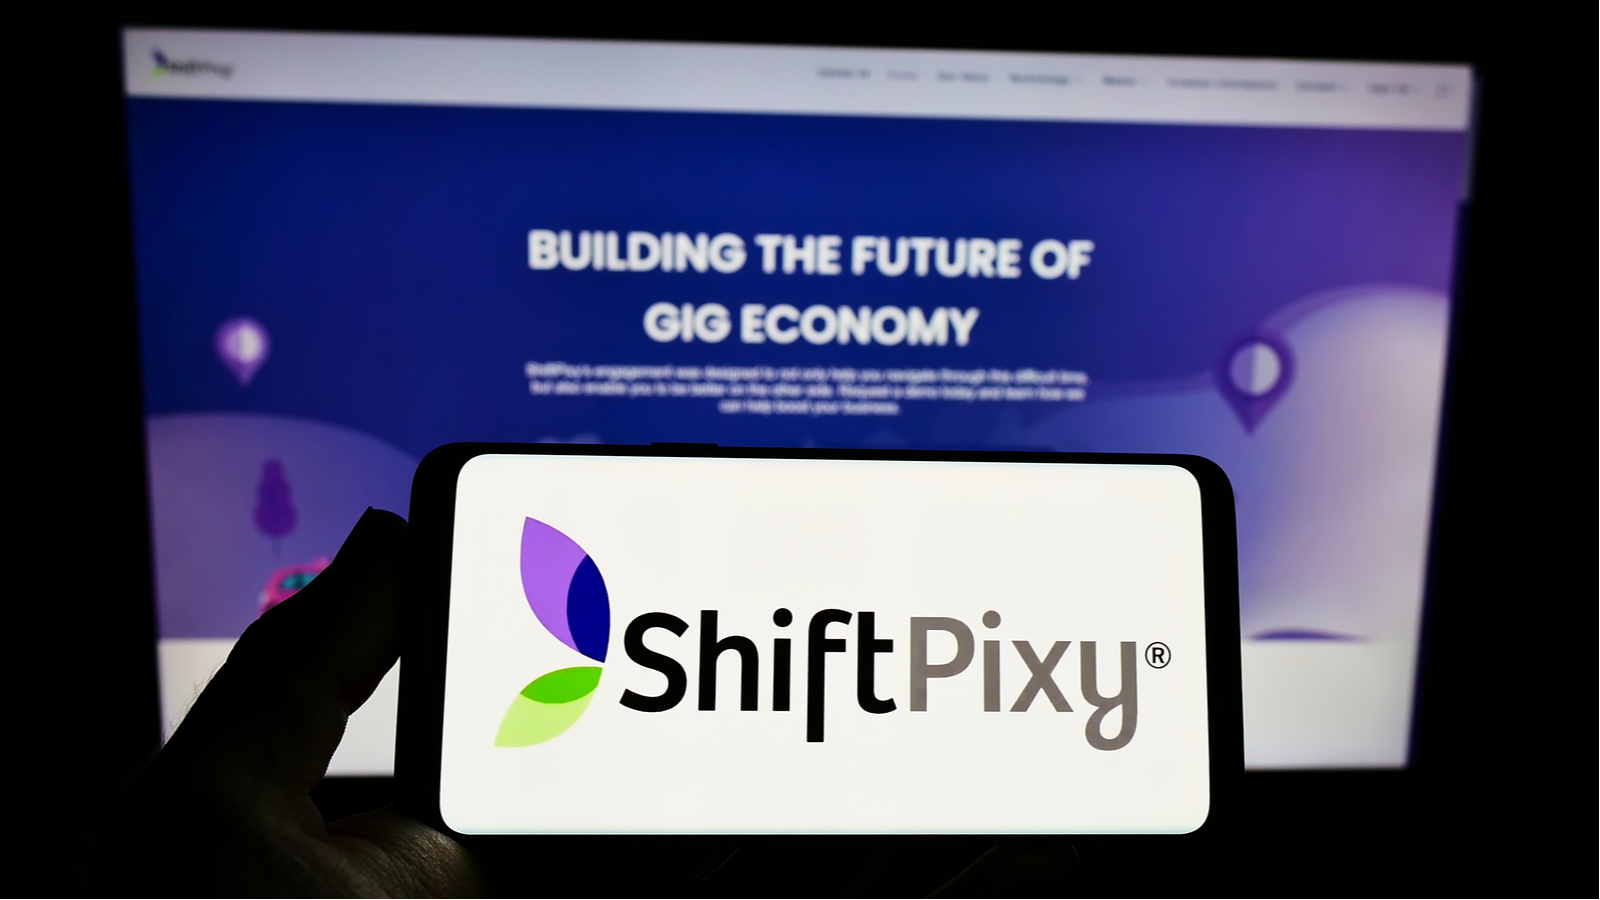 ShiftPixy (PIXY) logo displayed on a smartphone screen with company website on computer monitor behind smartphone